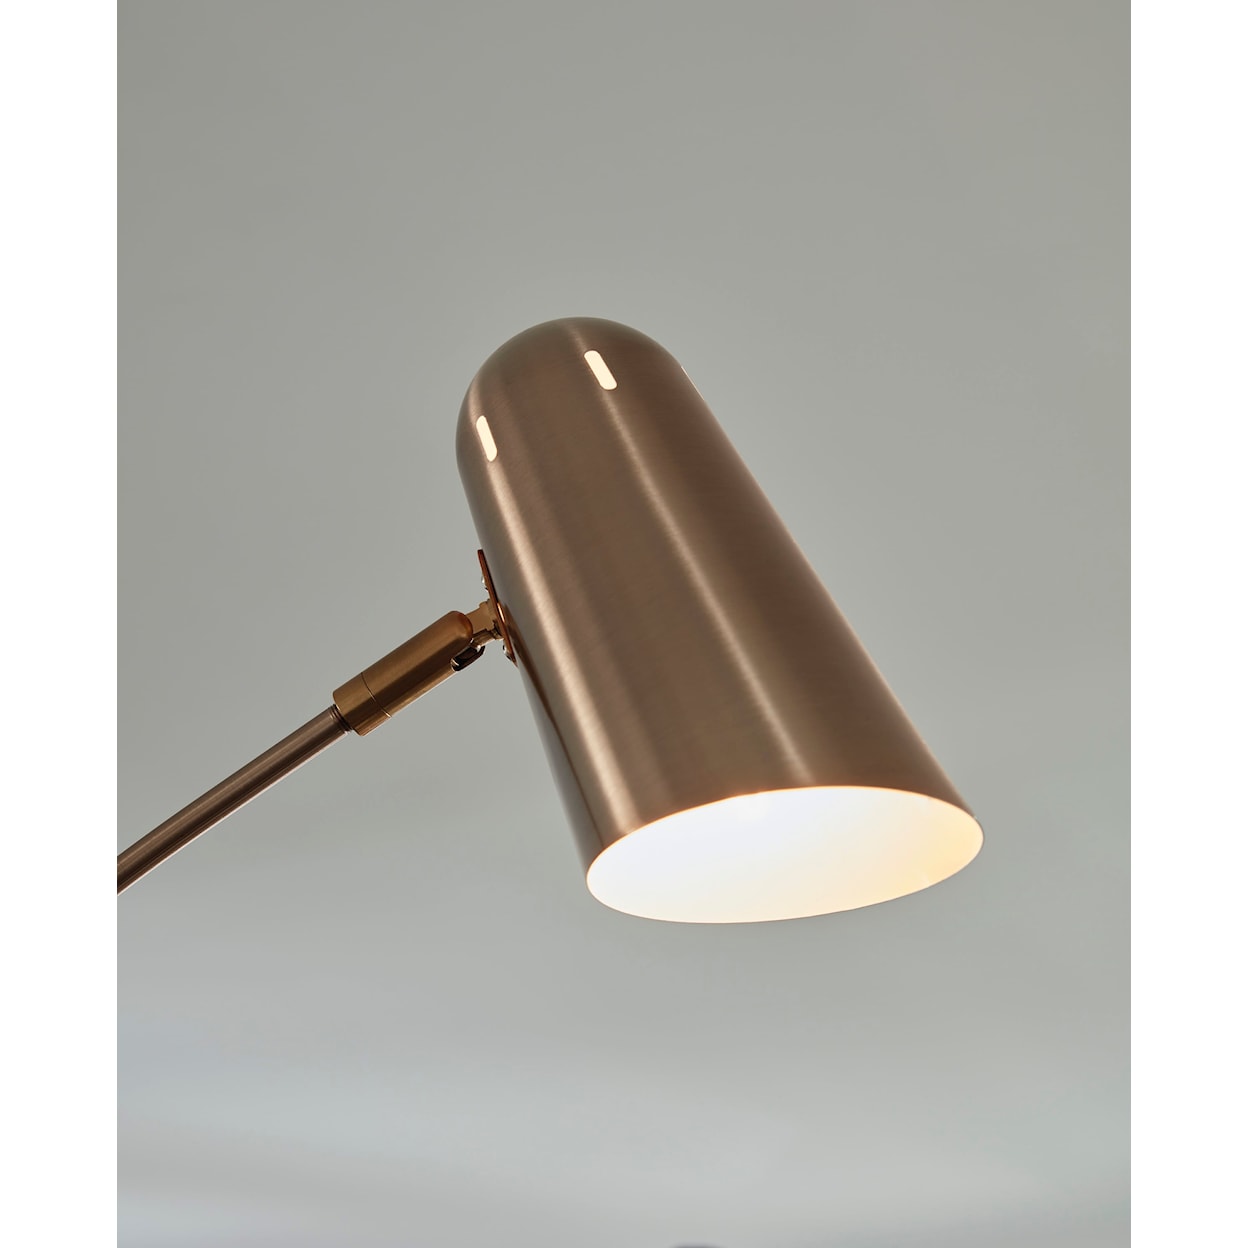 Signature Design by Ashley Lamps - Contemporary Colldale Arc Lamp